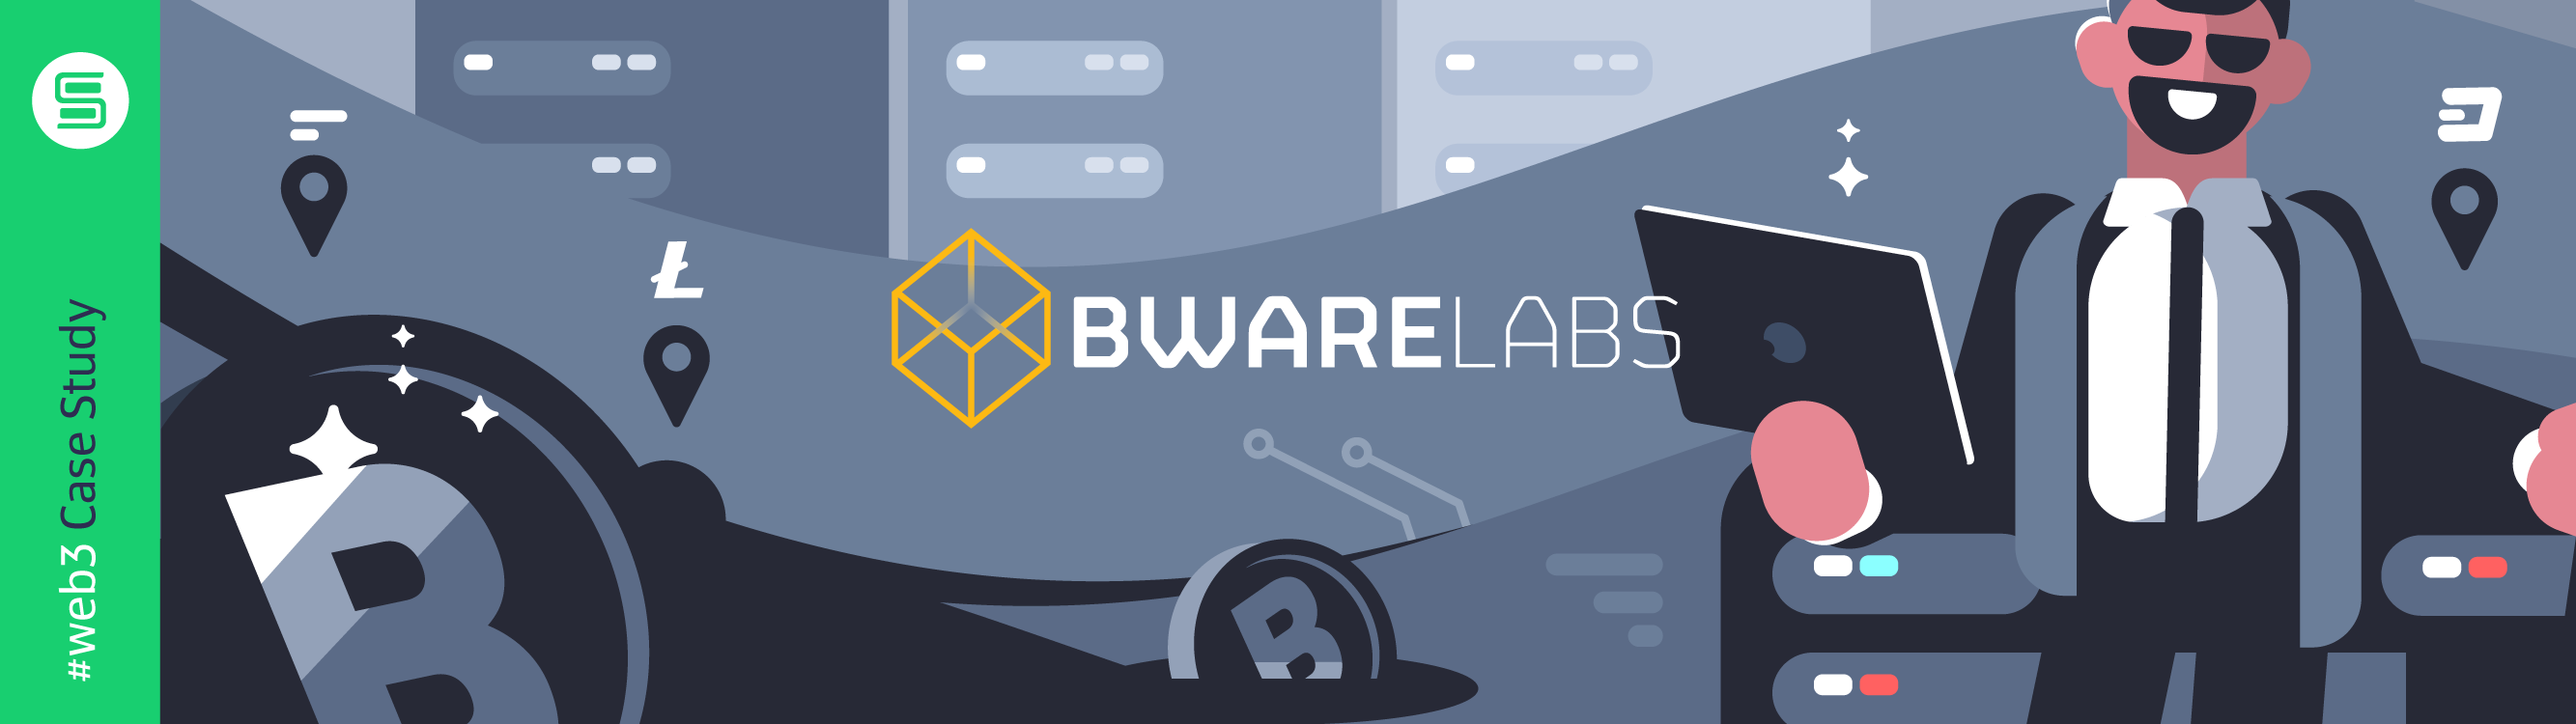 Partnering with Bware Labs to enable a multichain future